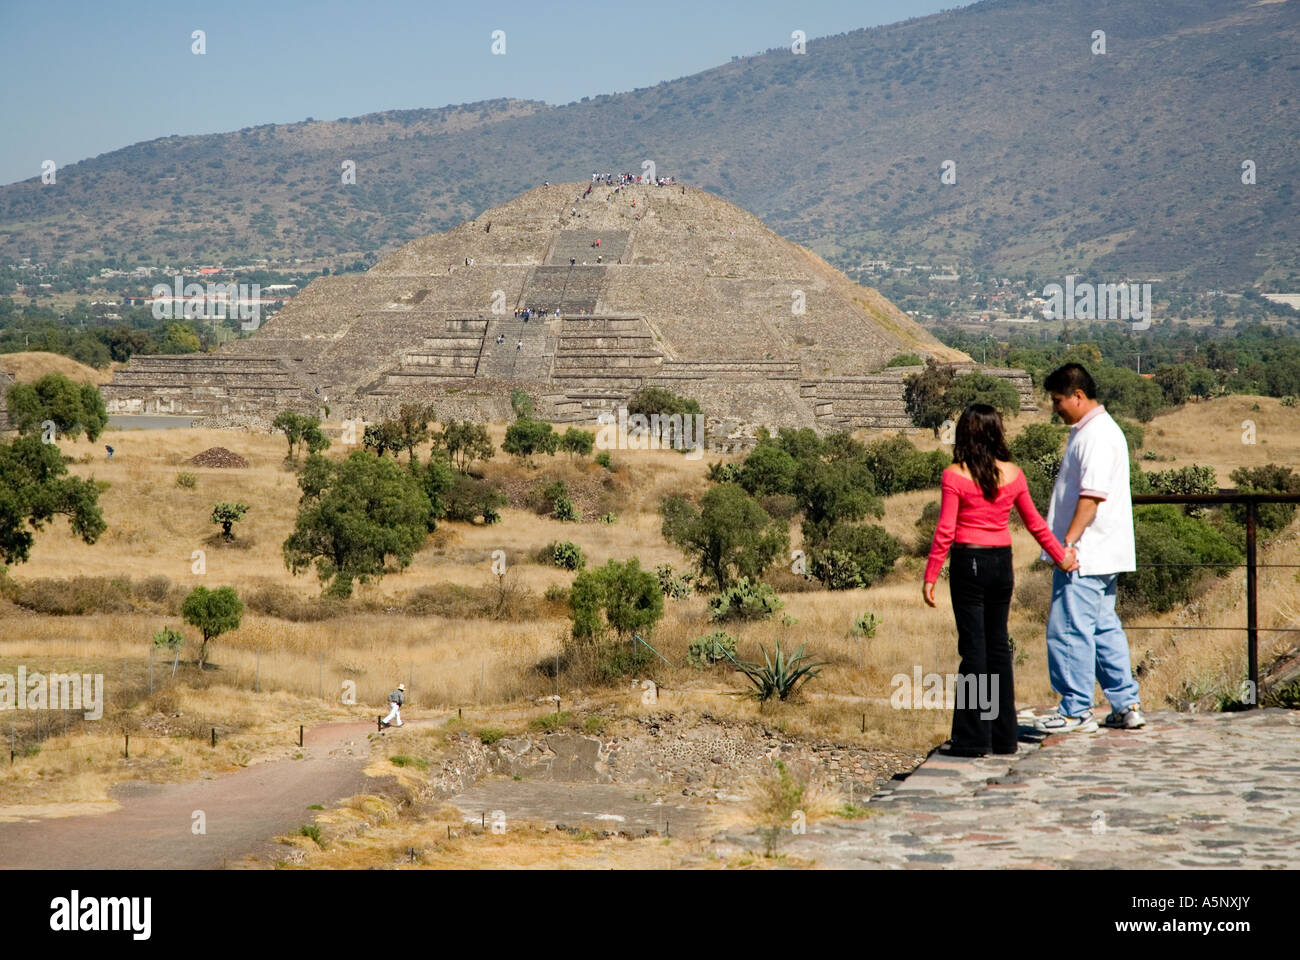 Pyramid of the Moon - Teotihuacan - Mexico Stock Photo - Alamy